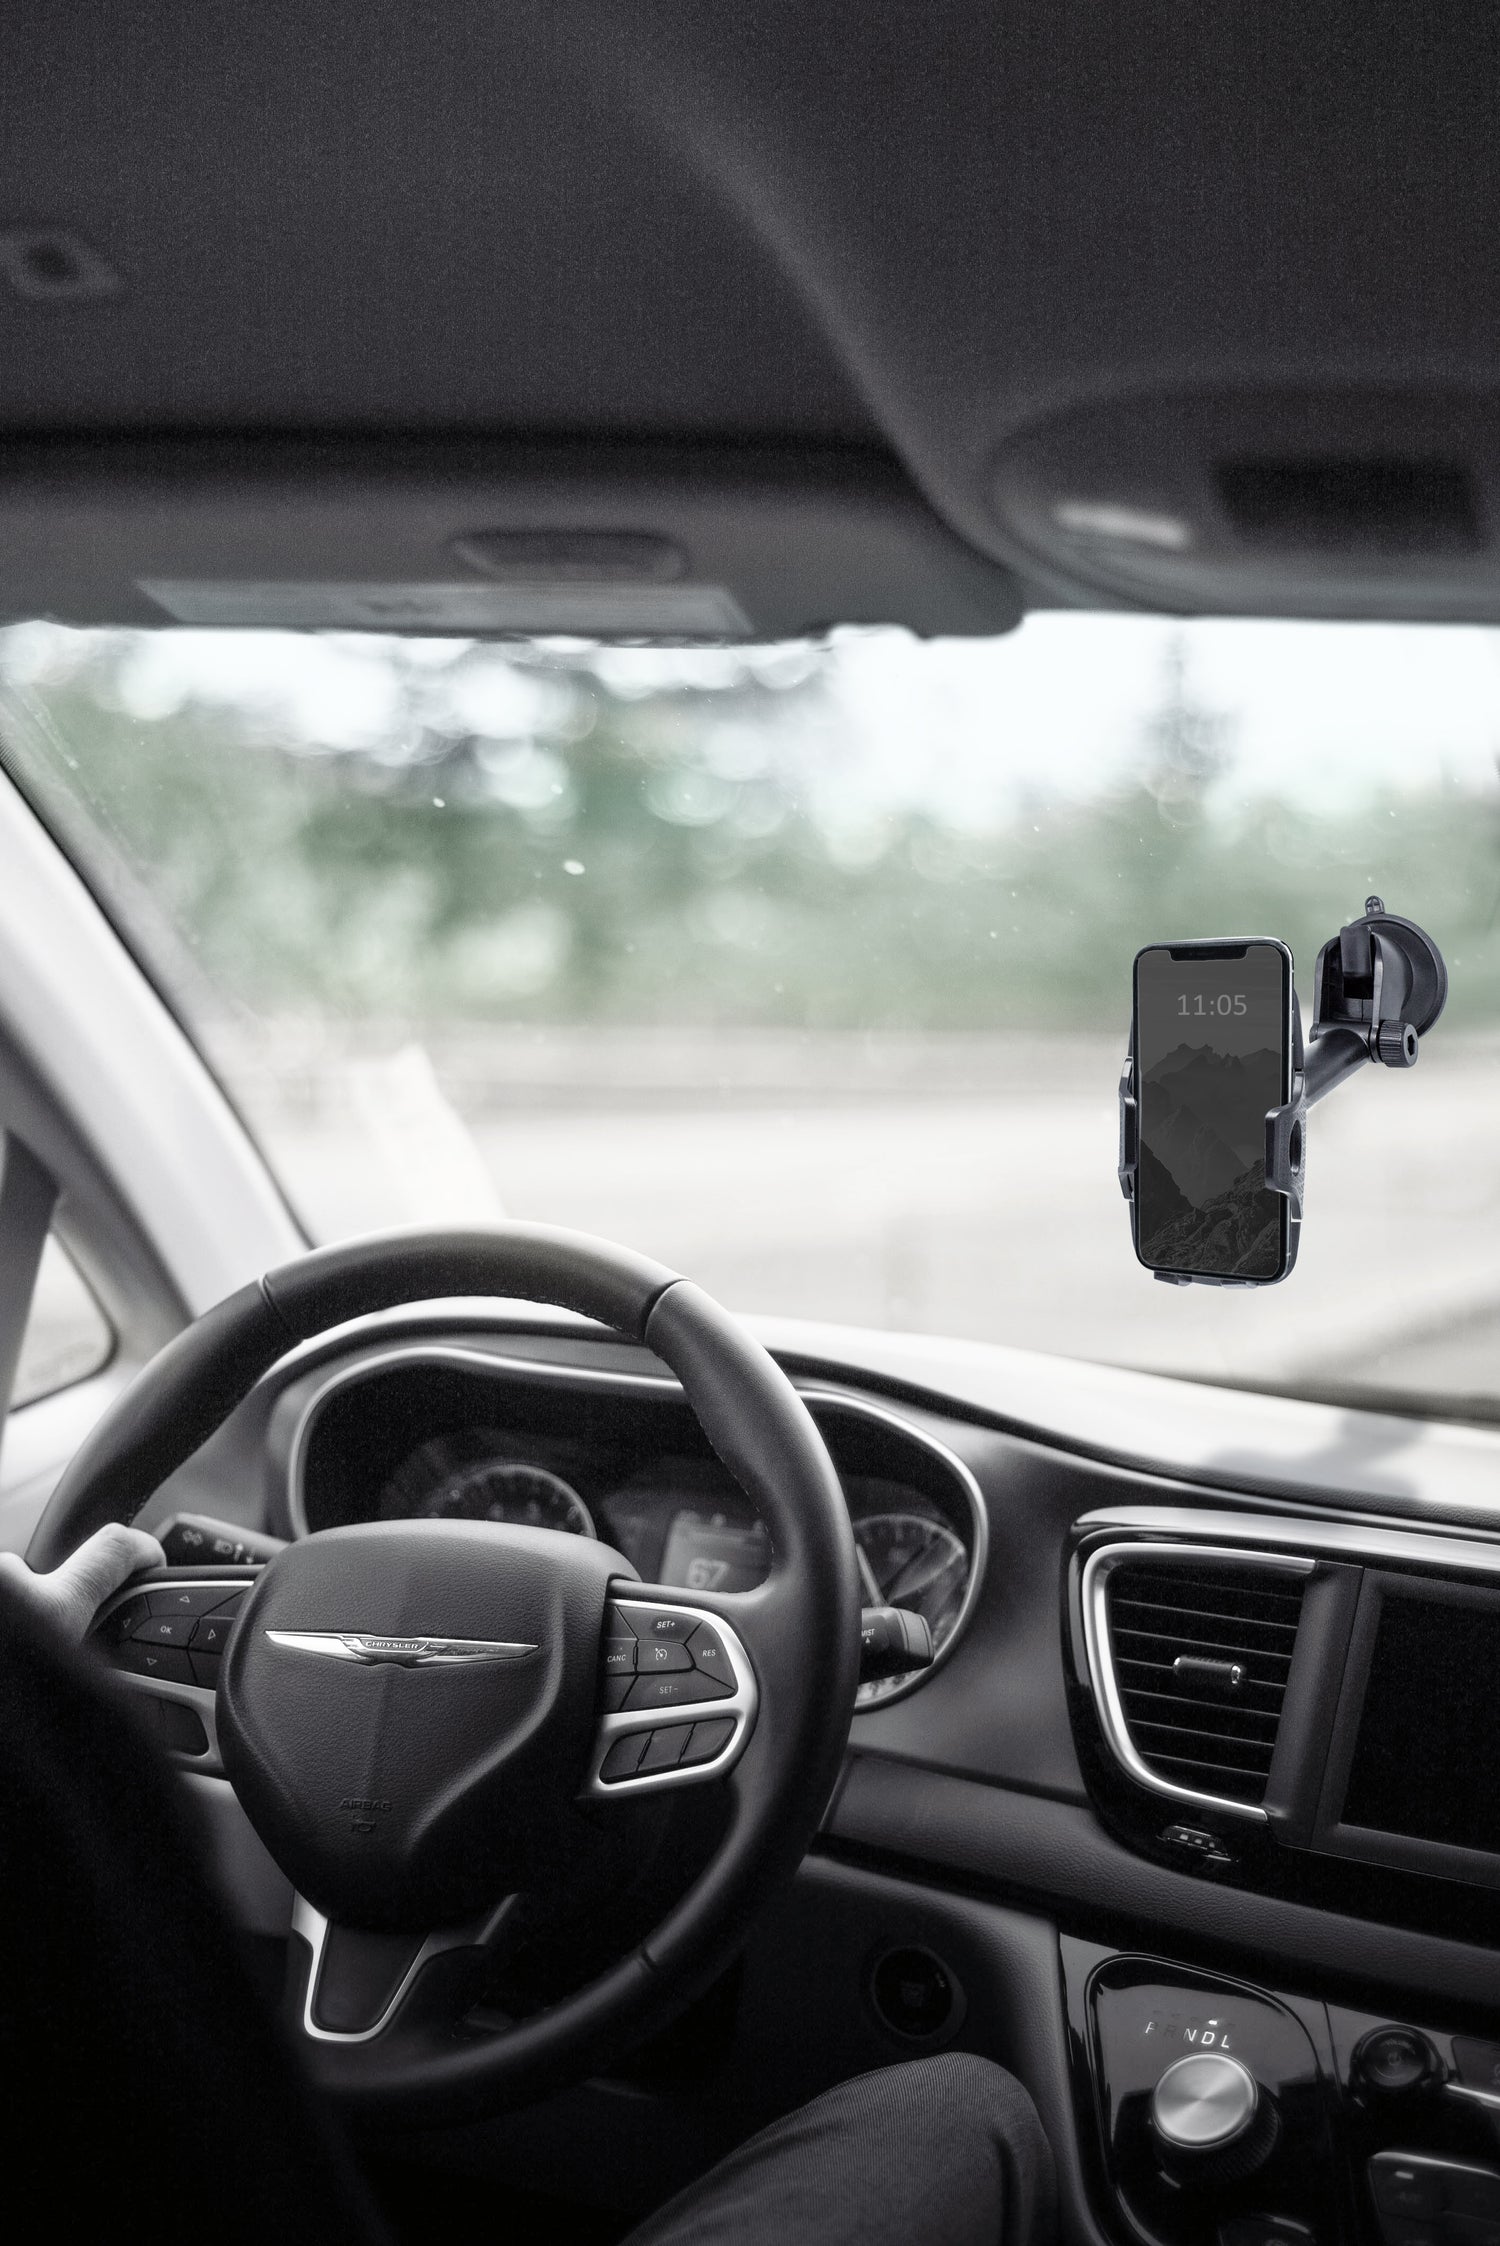 Stay Hands-Free on the Road with the Adreama Adjustable Universal Car Mount